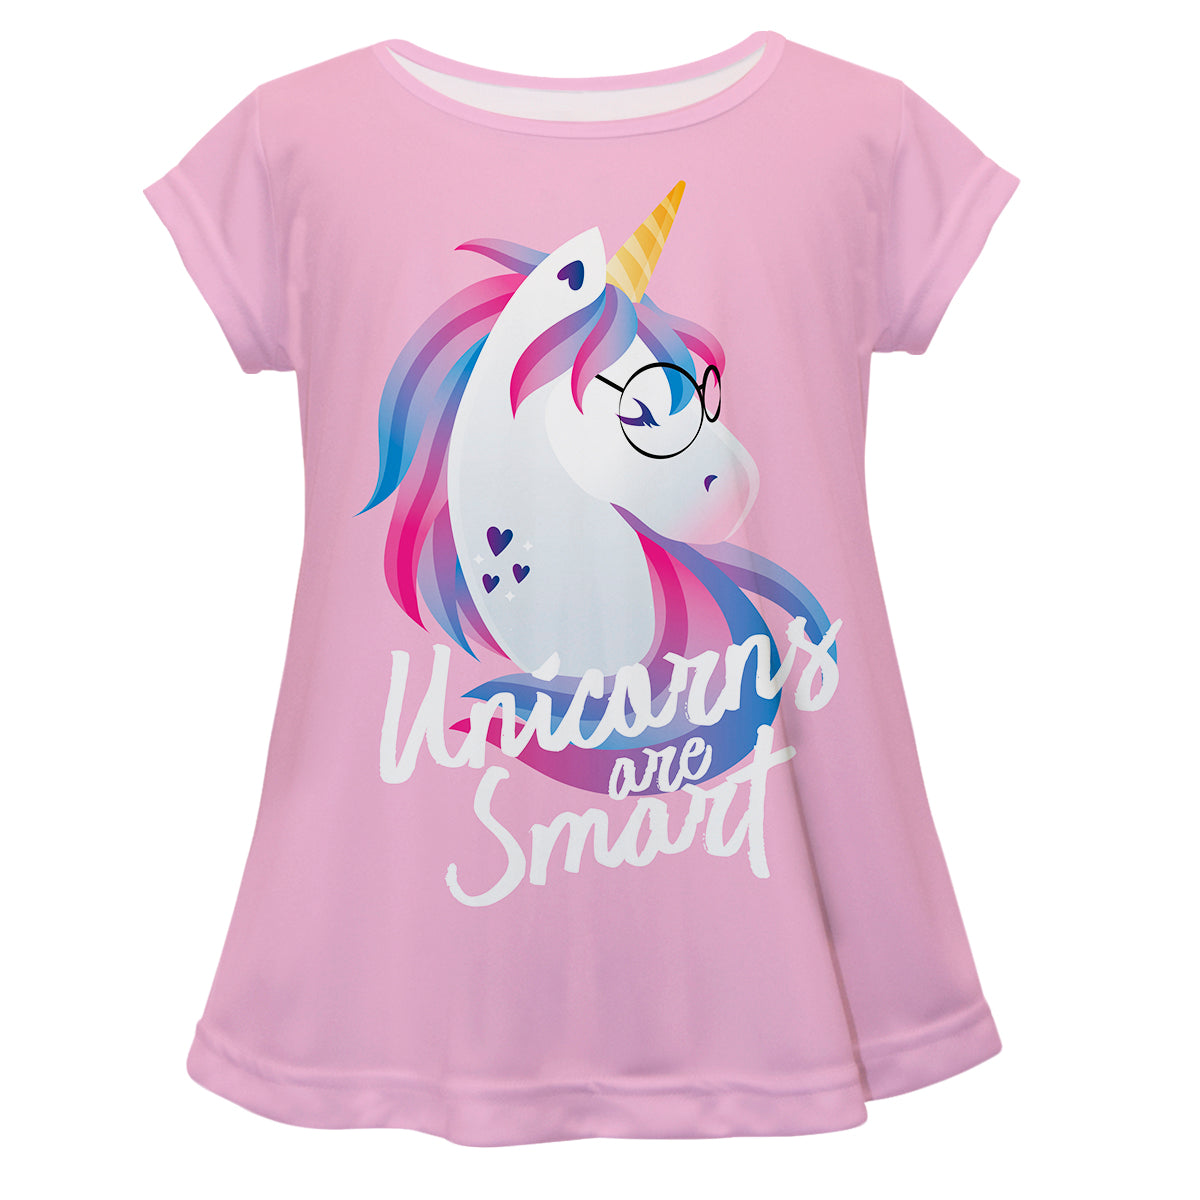 Pink and white 'unicorns are smart' girls blouse - Wimziy&Co.